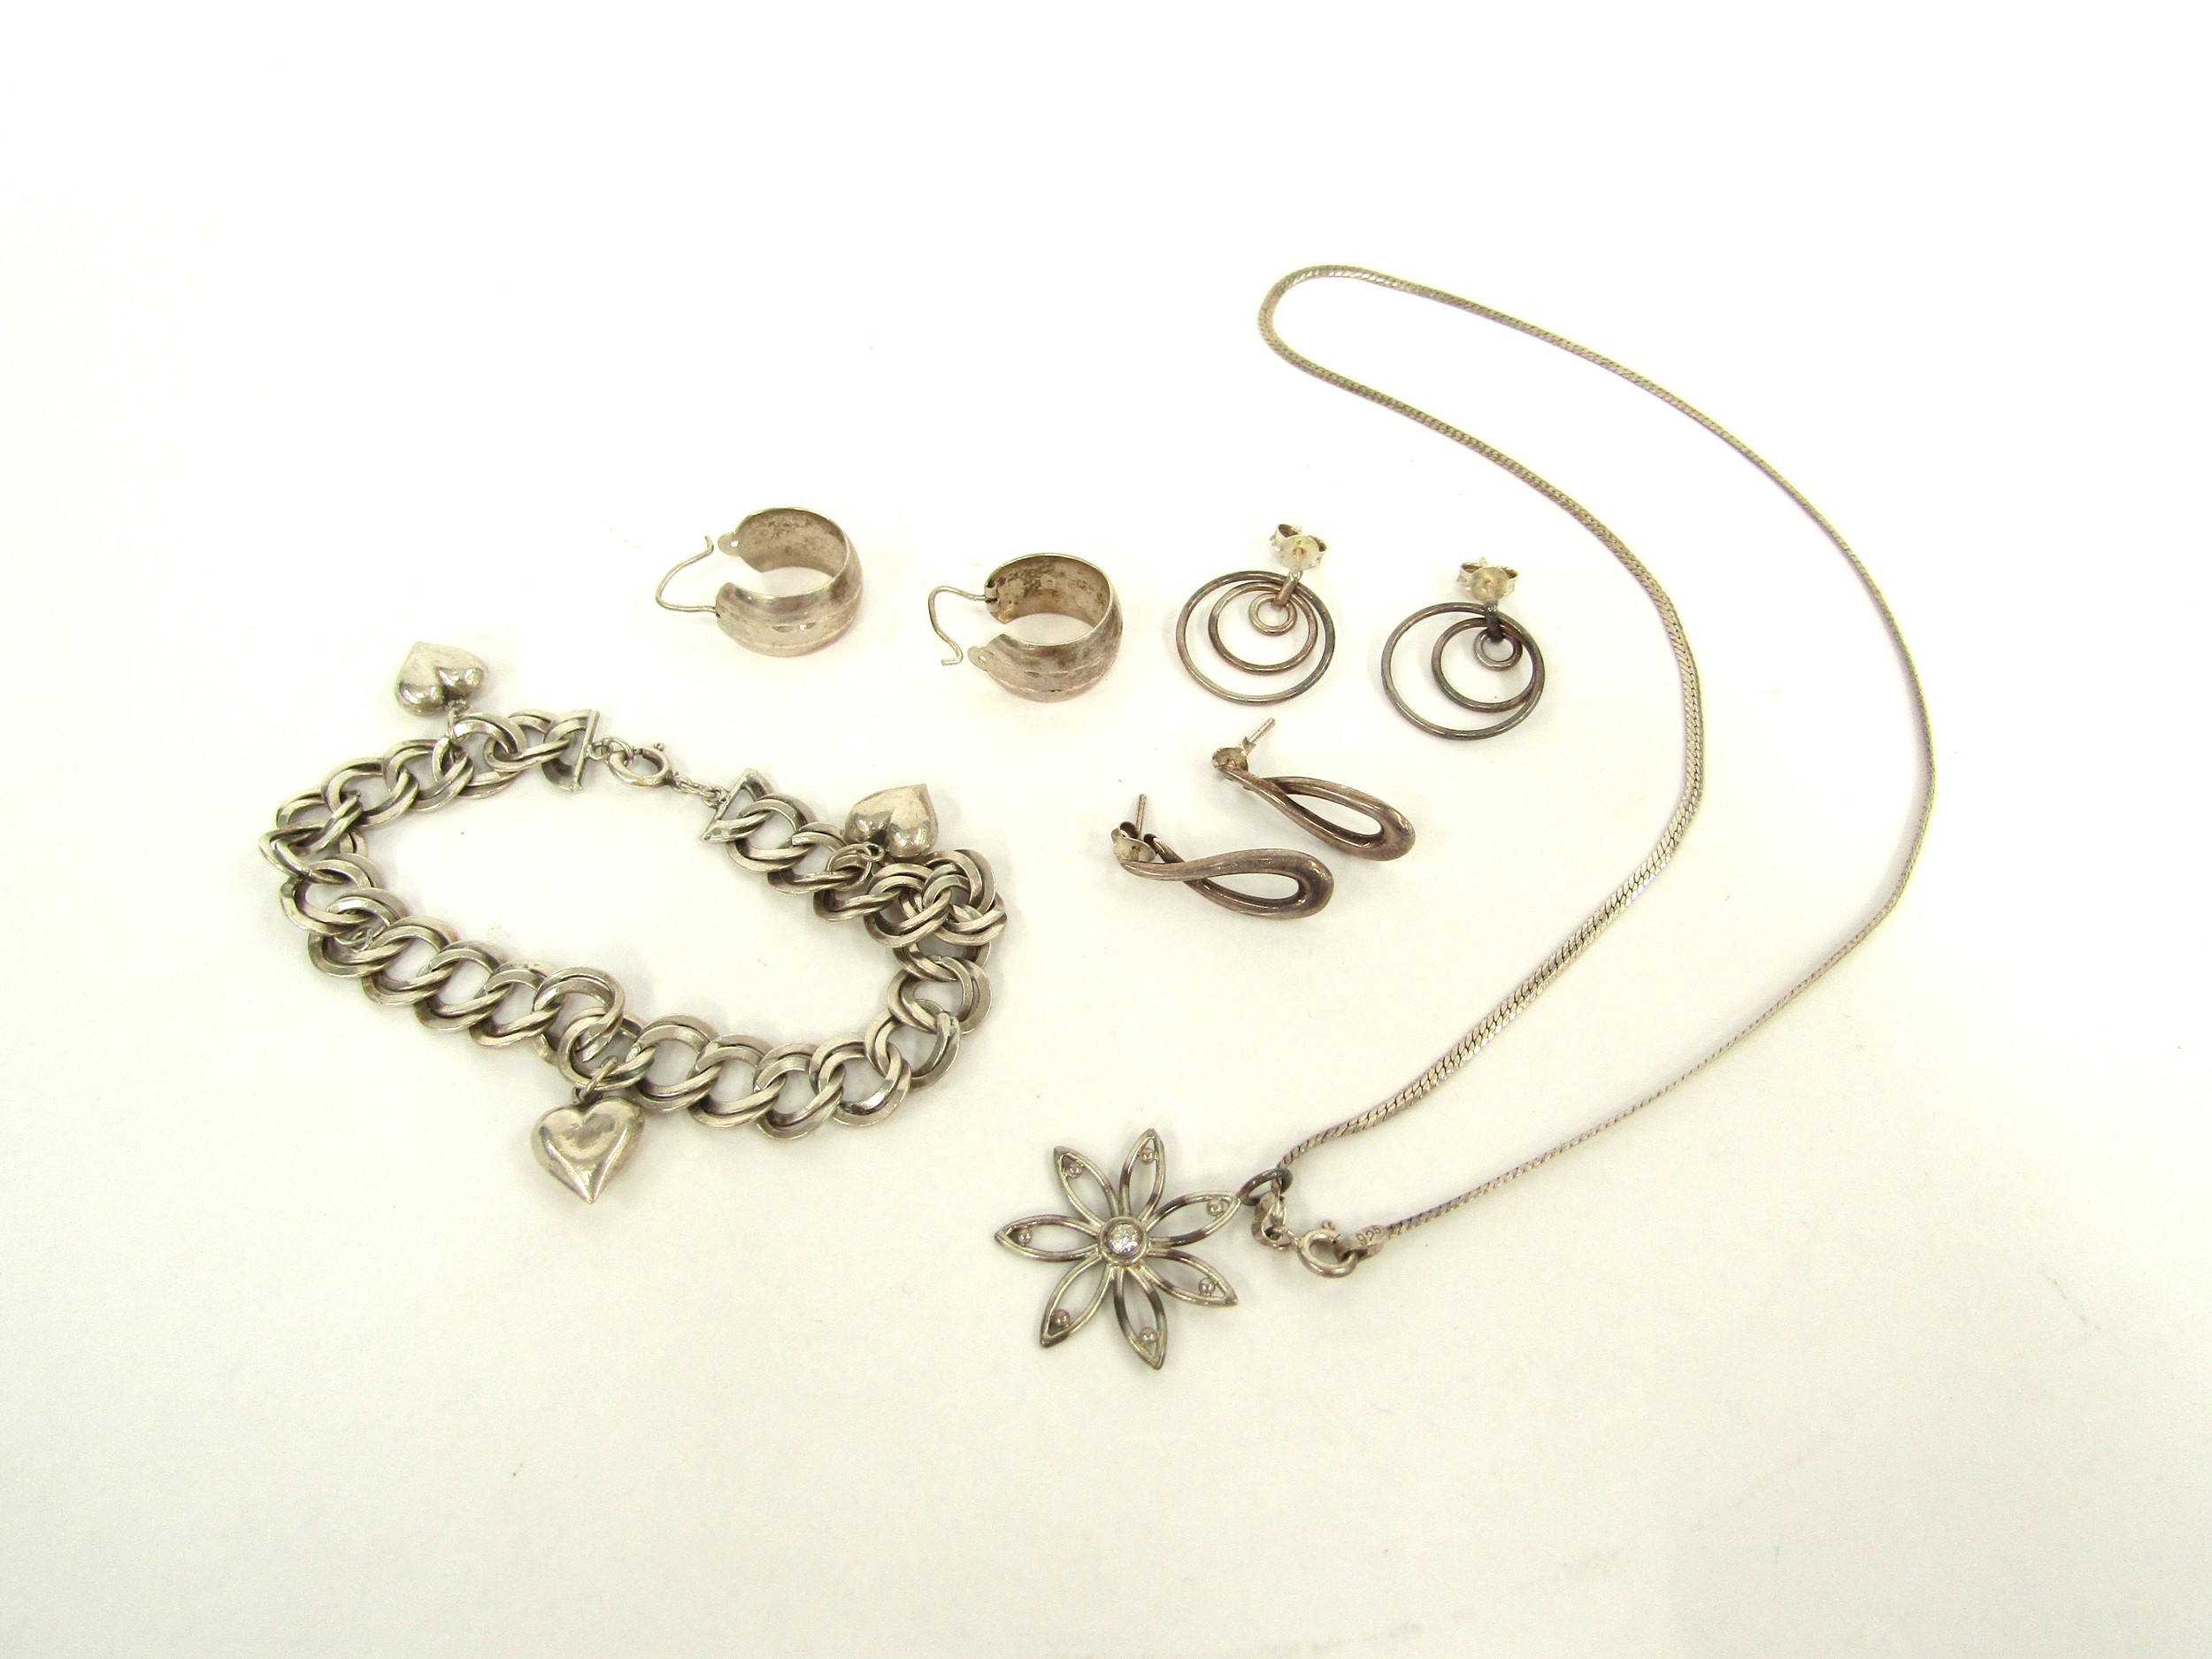 Silver necklace hung with floral pendant, sterling silver heart charm bracelet and three pairs of